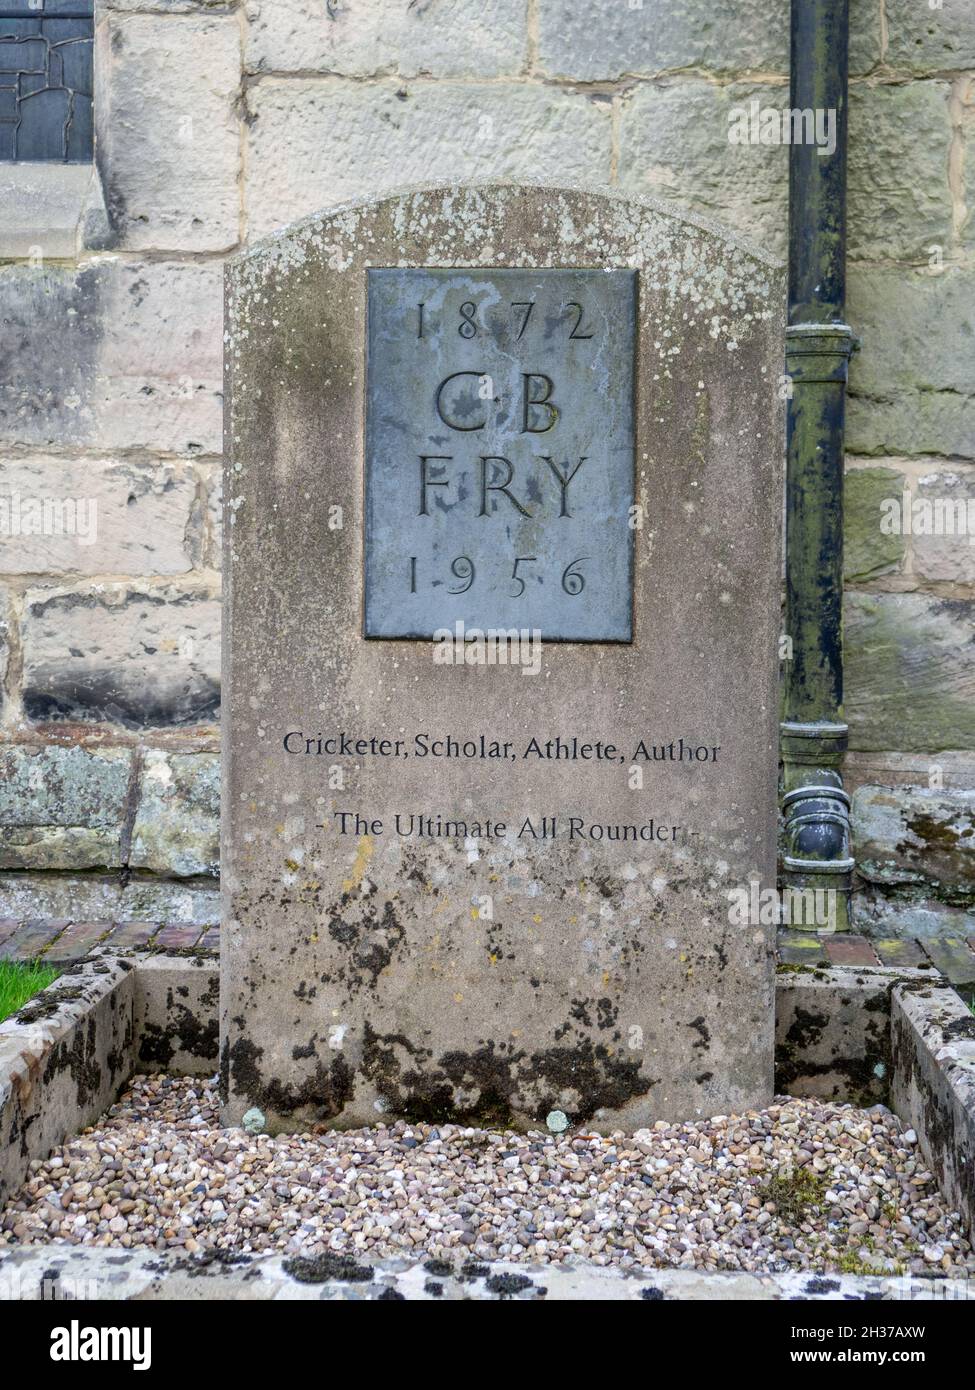 Headstone of cricketer C B Fry, 1872-1956, in the churchyard of St Wystans, Repton, Derbyshire, UK Stock Photo